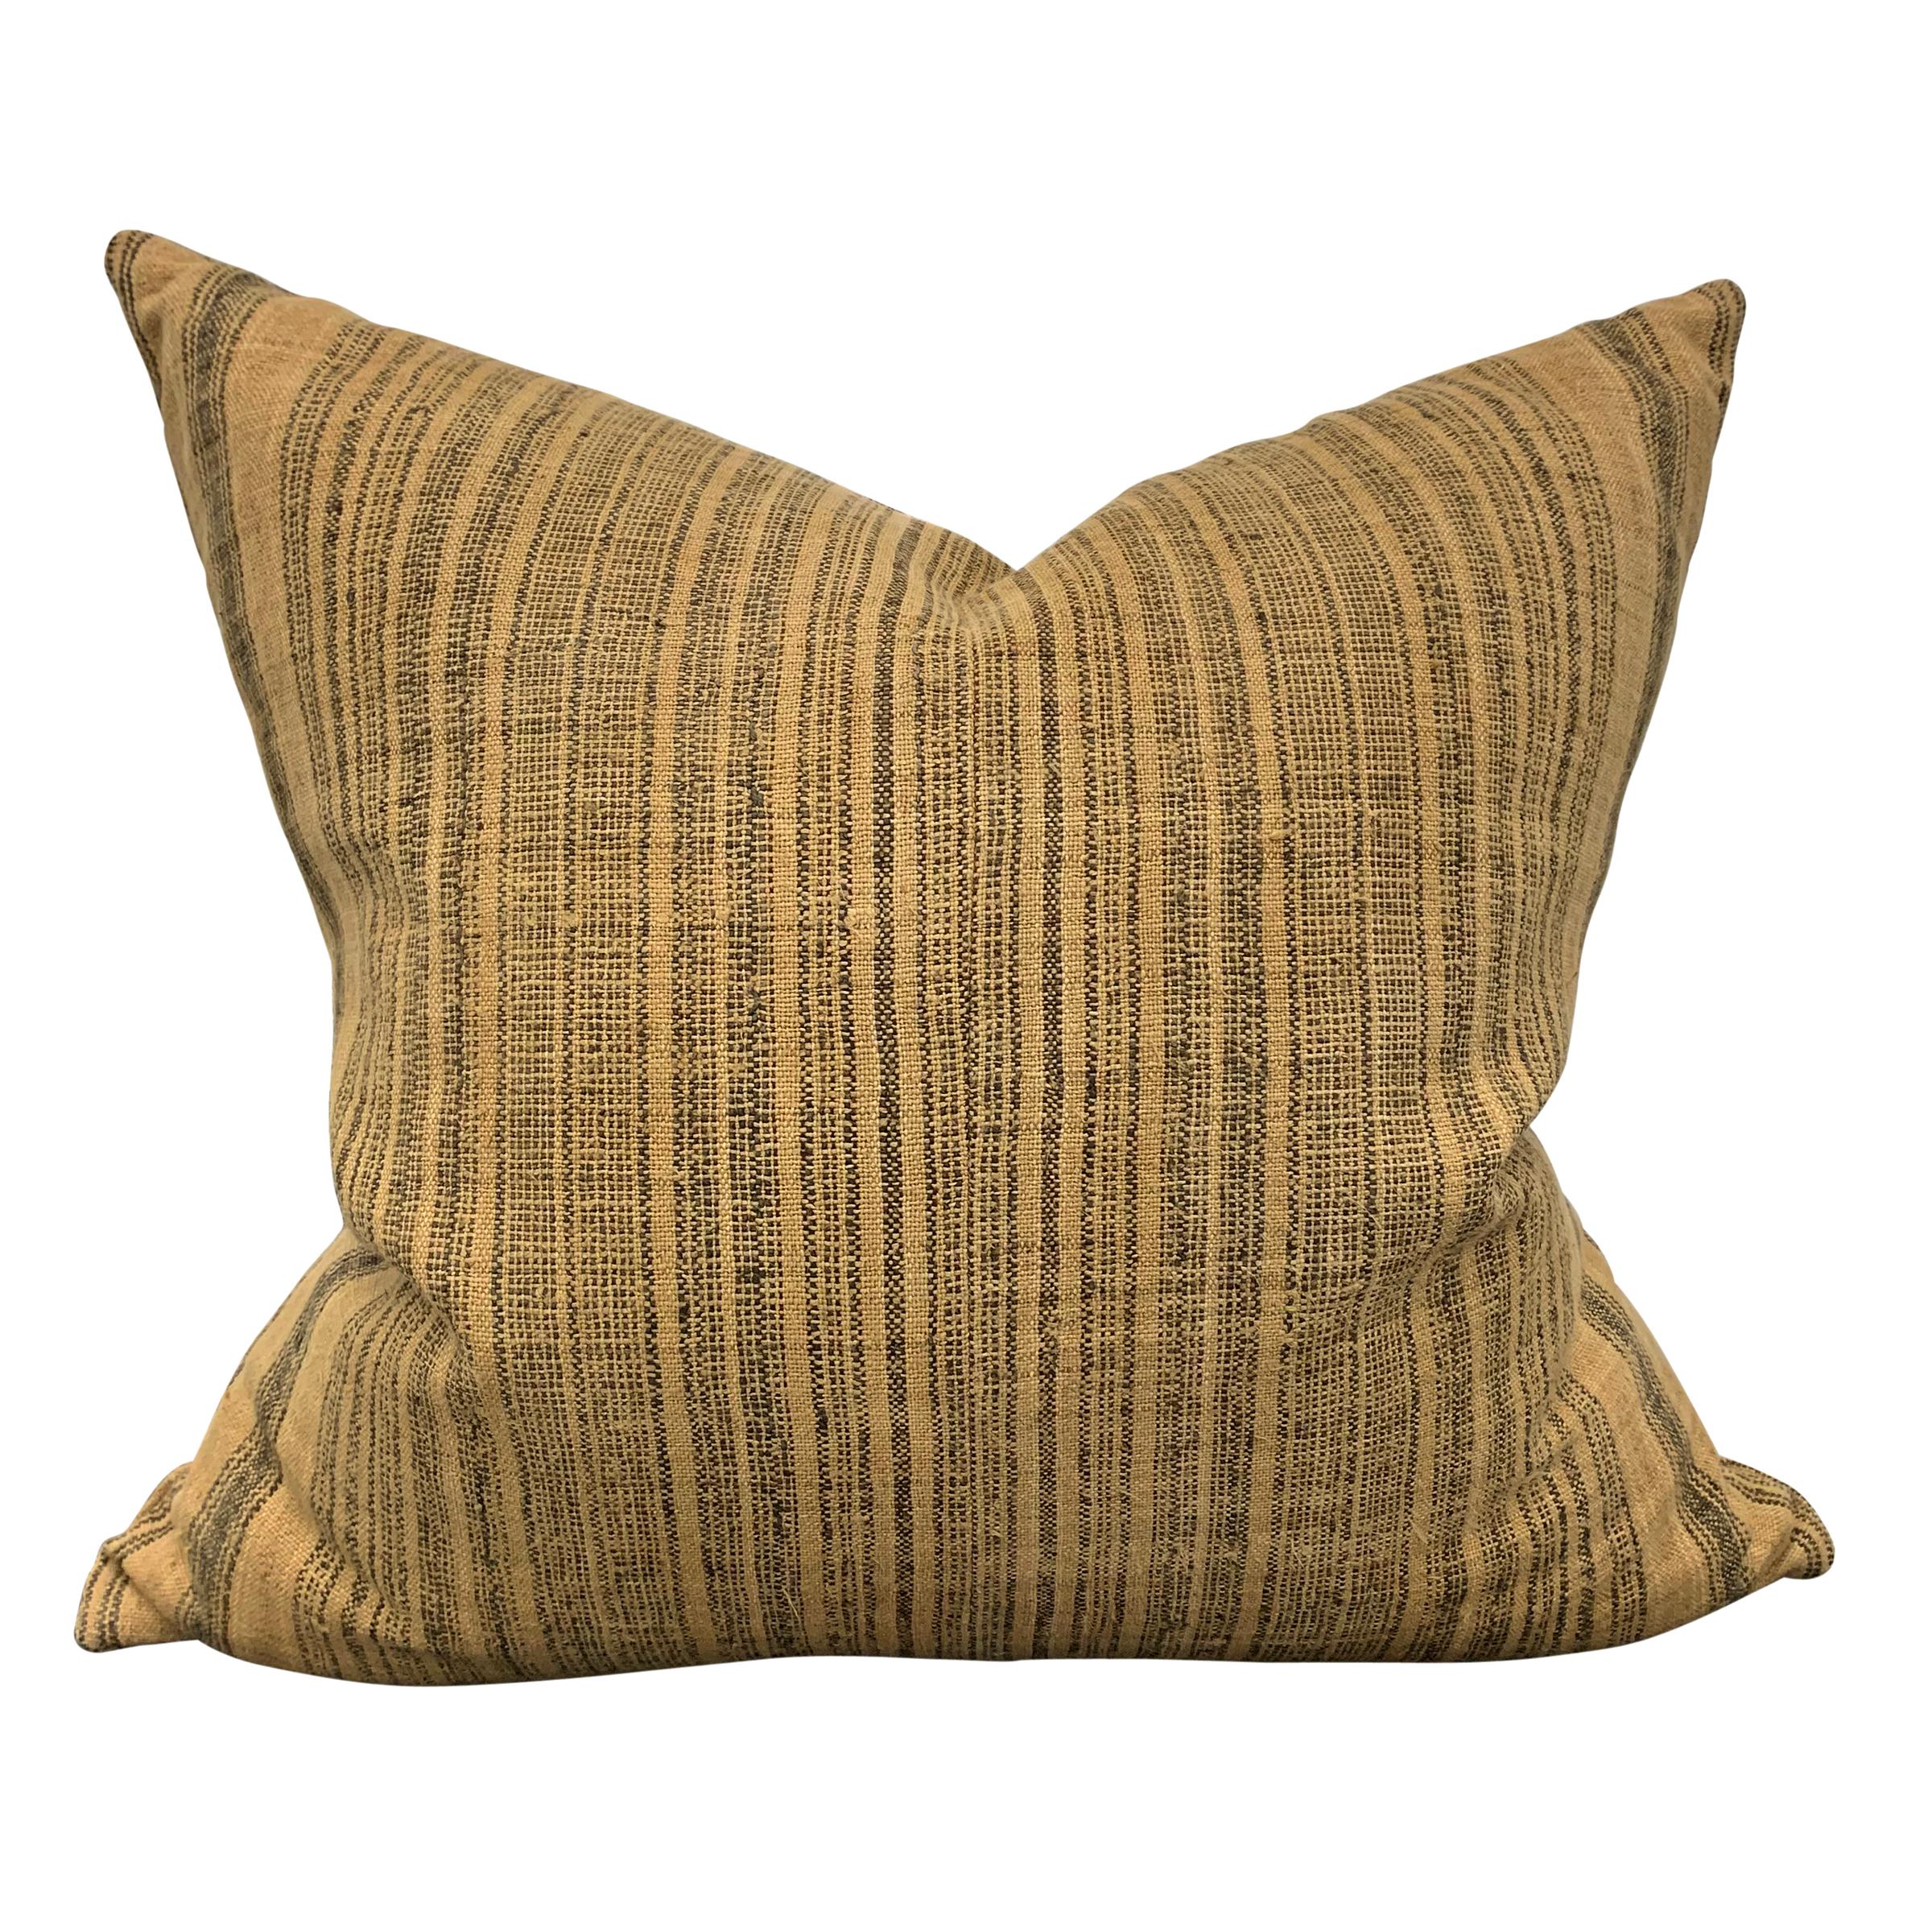 A pair of custom pillows made from early 20th century hand-woven Thai Hill Tribe woven linen with stripes of varying widths, filled with down.